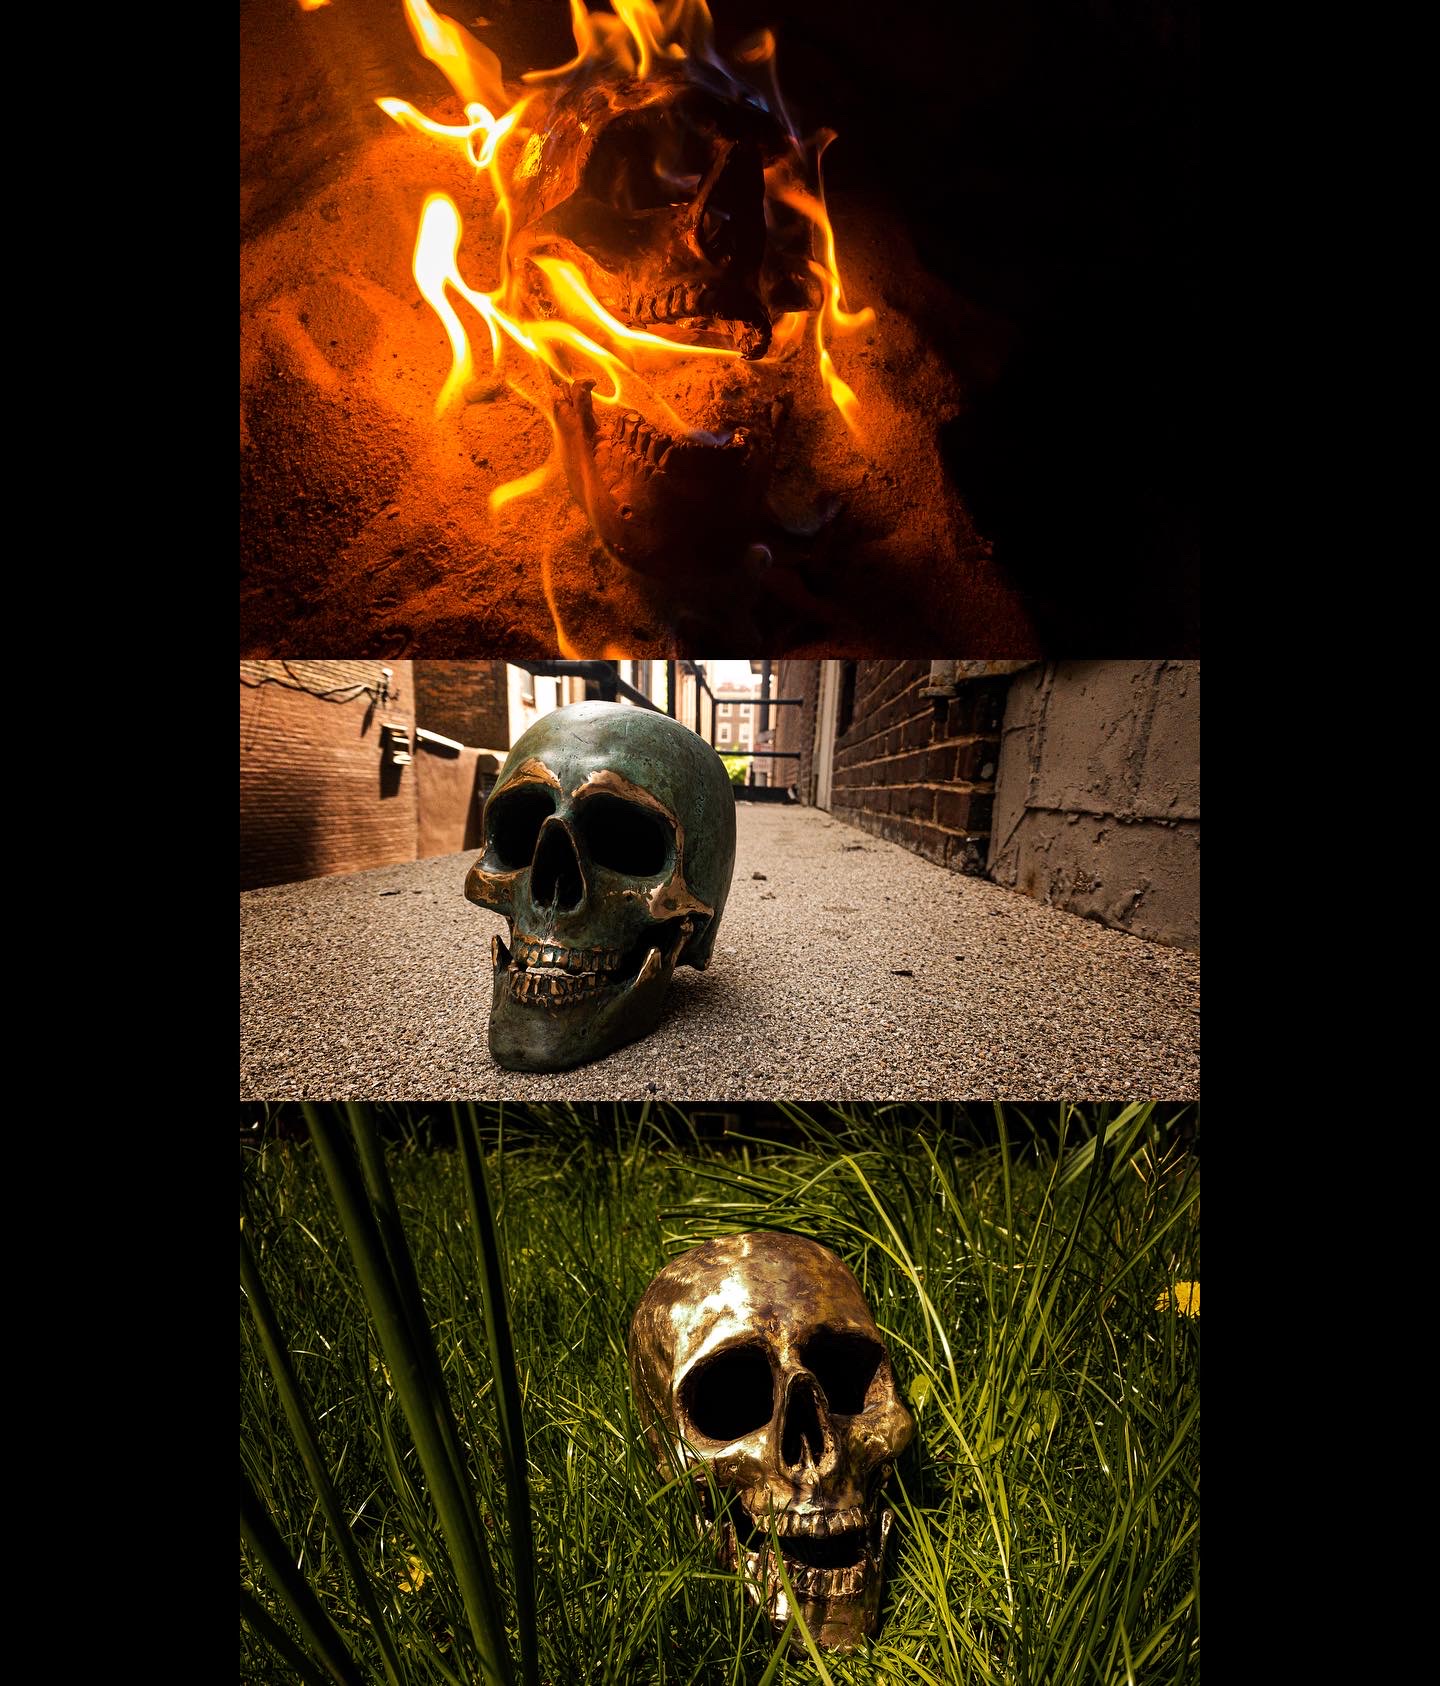 sculpture by Logan Smith consisting brass-y metal skull. it is depicted at the top resting in flames, in the middle on the ground with a greenish patina, and at the bottom in tall green grass and polished to a bright golden hue. 